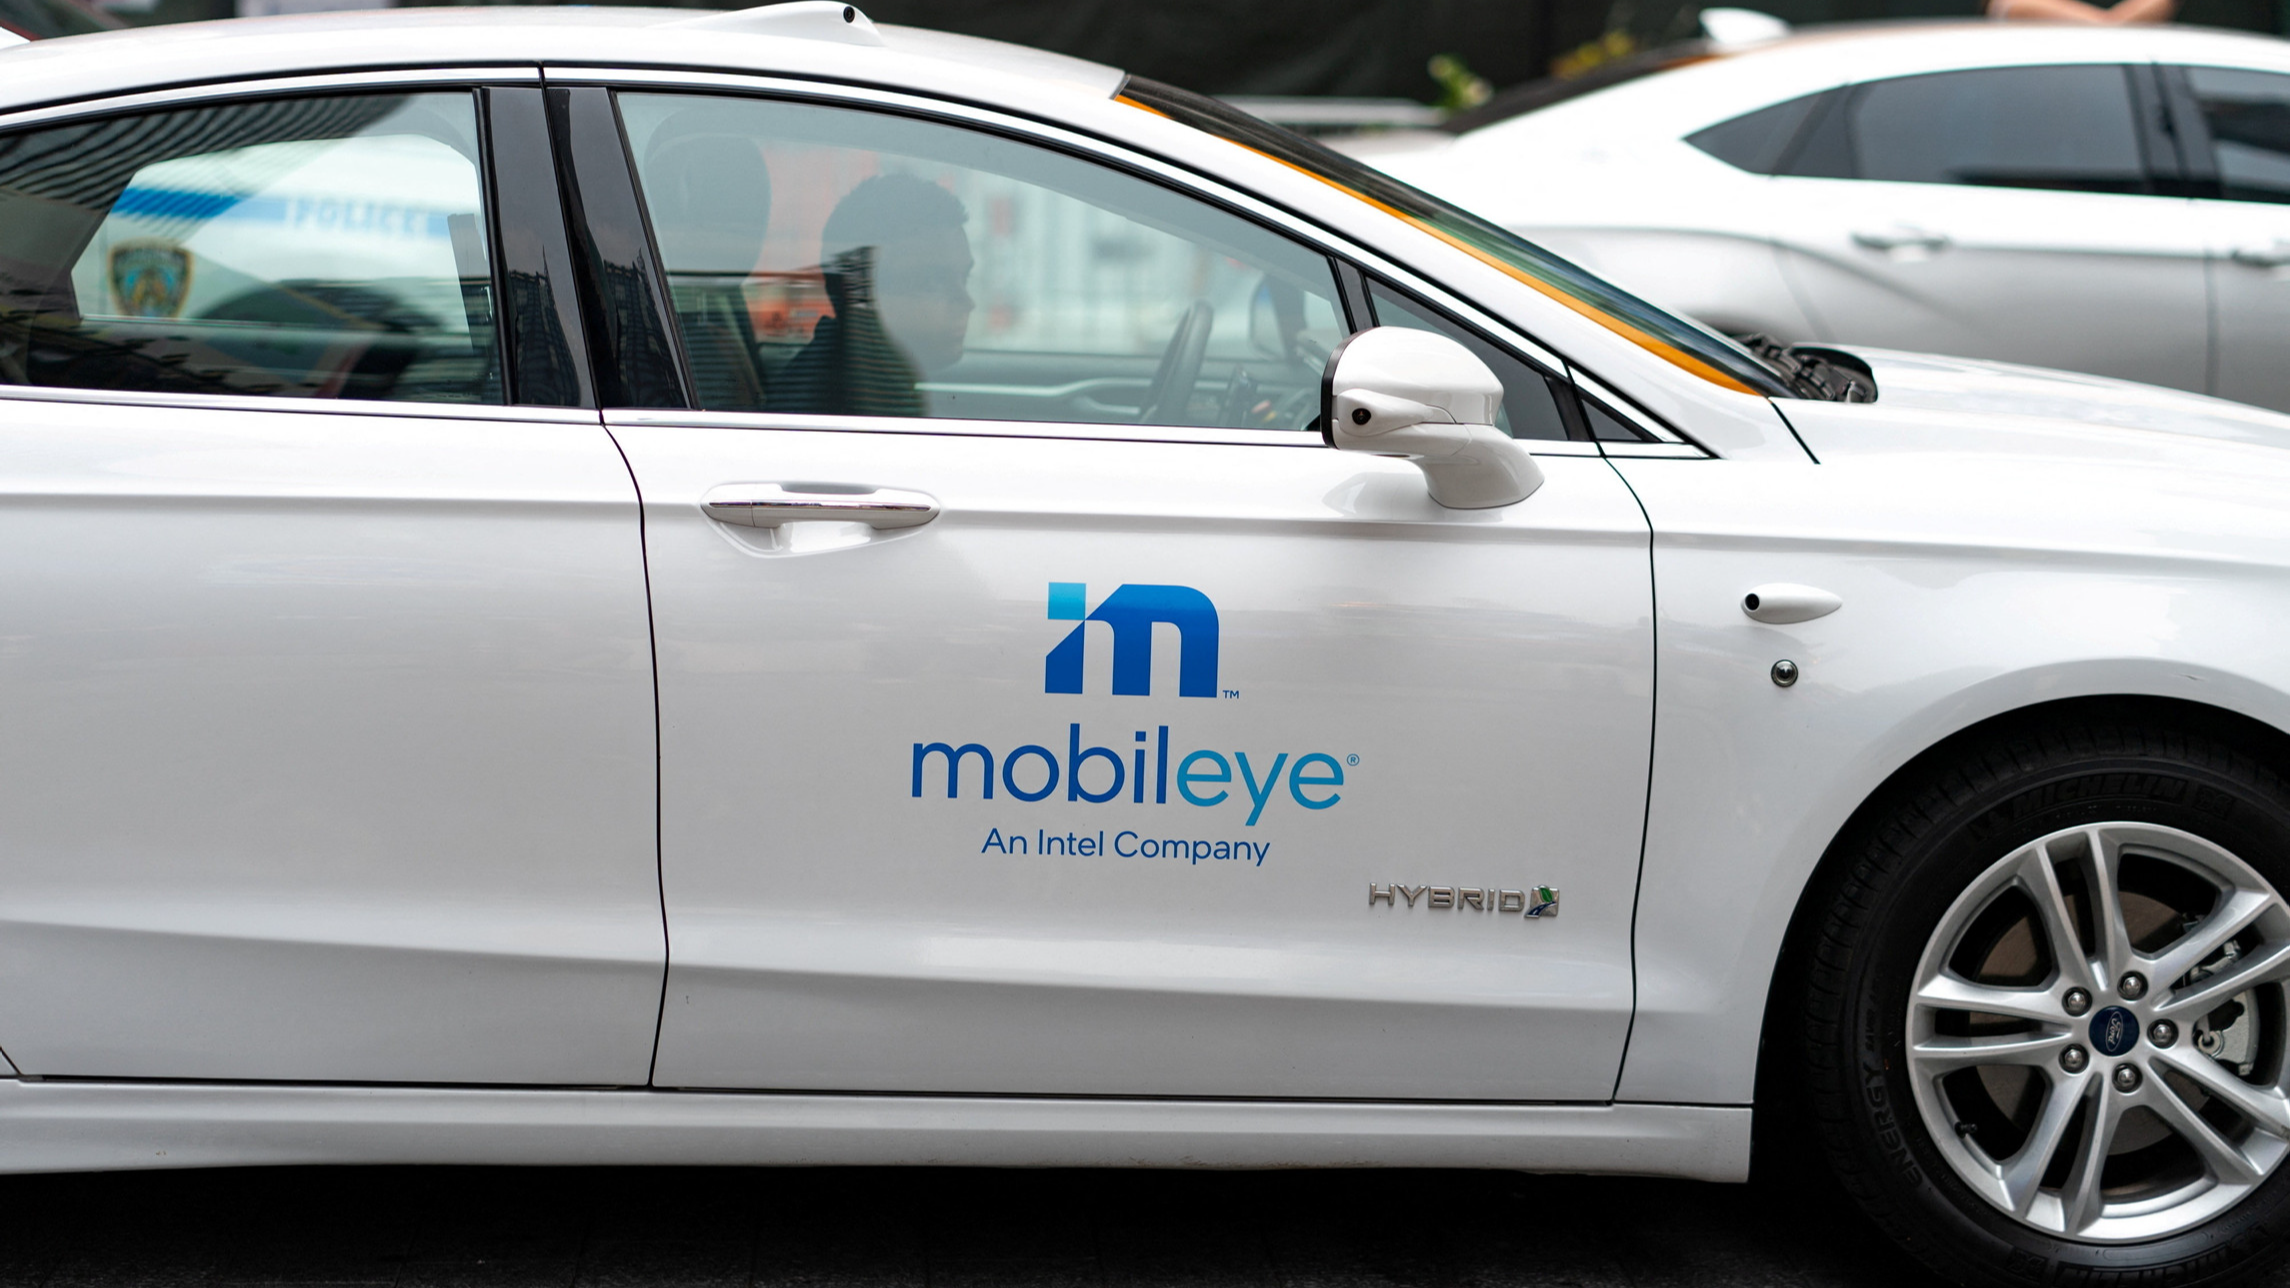 Intel's Mobileye slashes IPO valuation to below $16bn